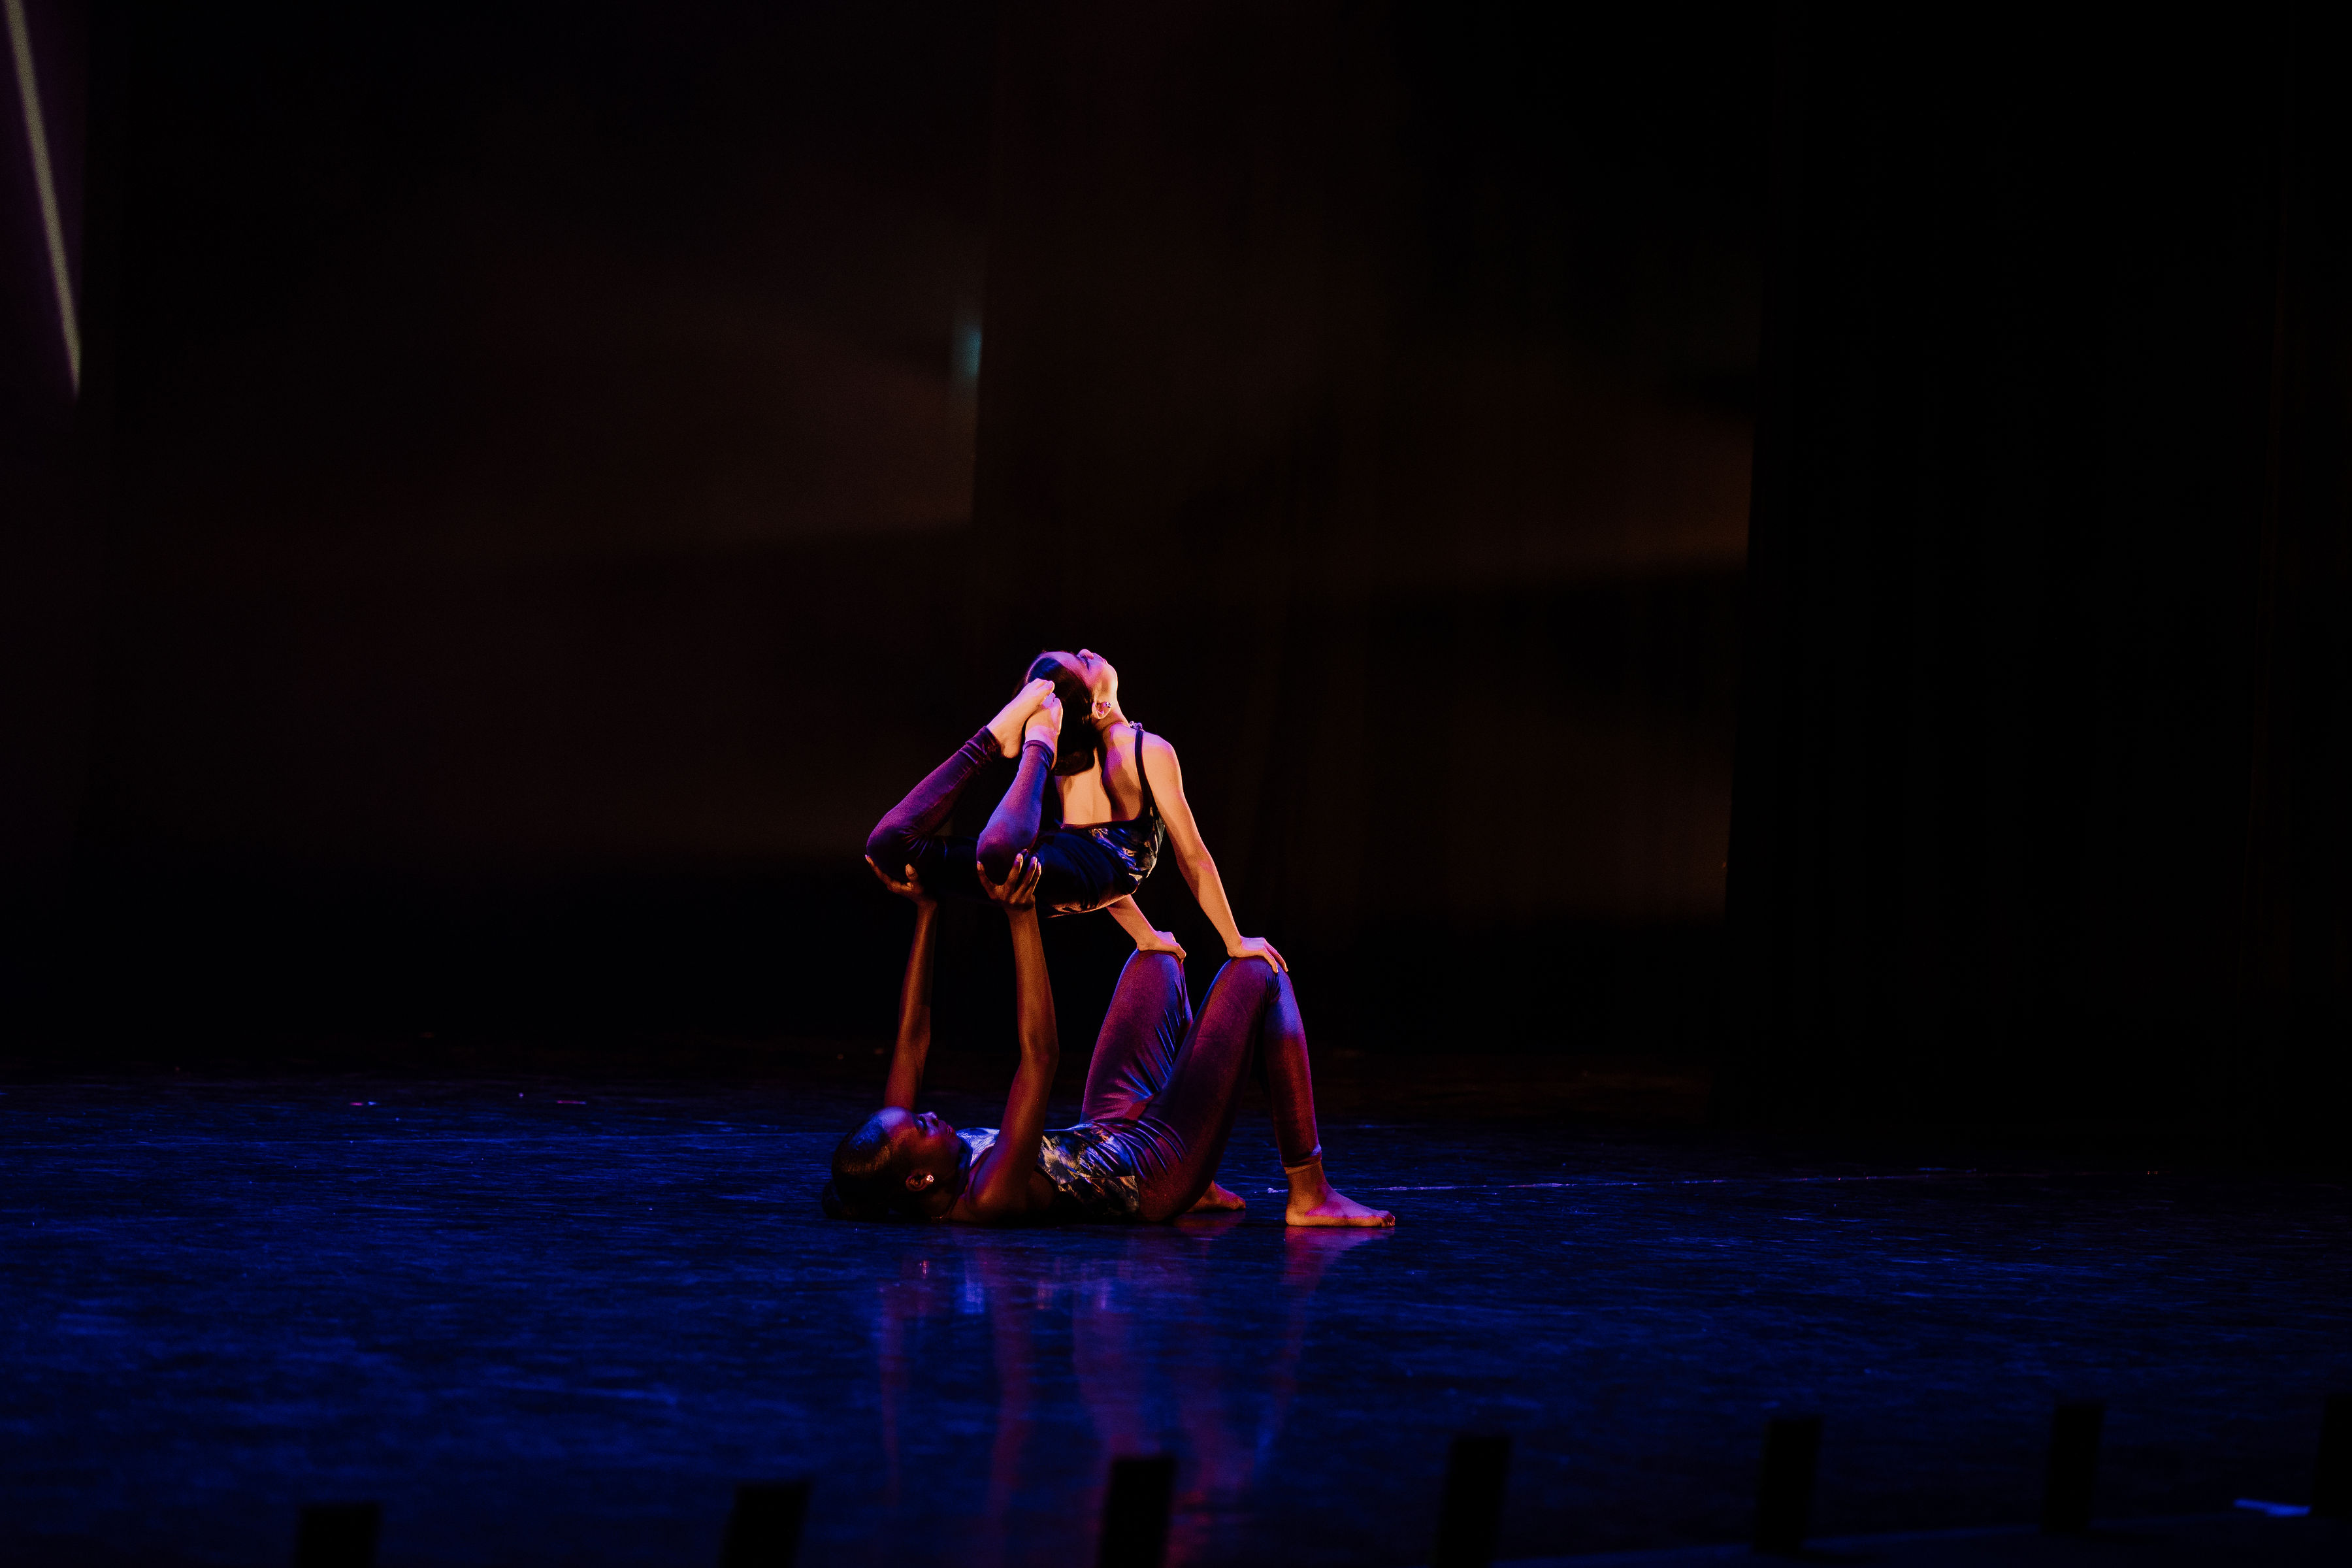 Two dancers performing an Acro routine on stage